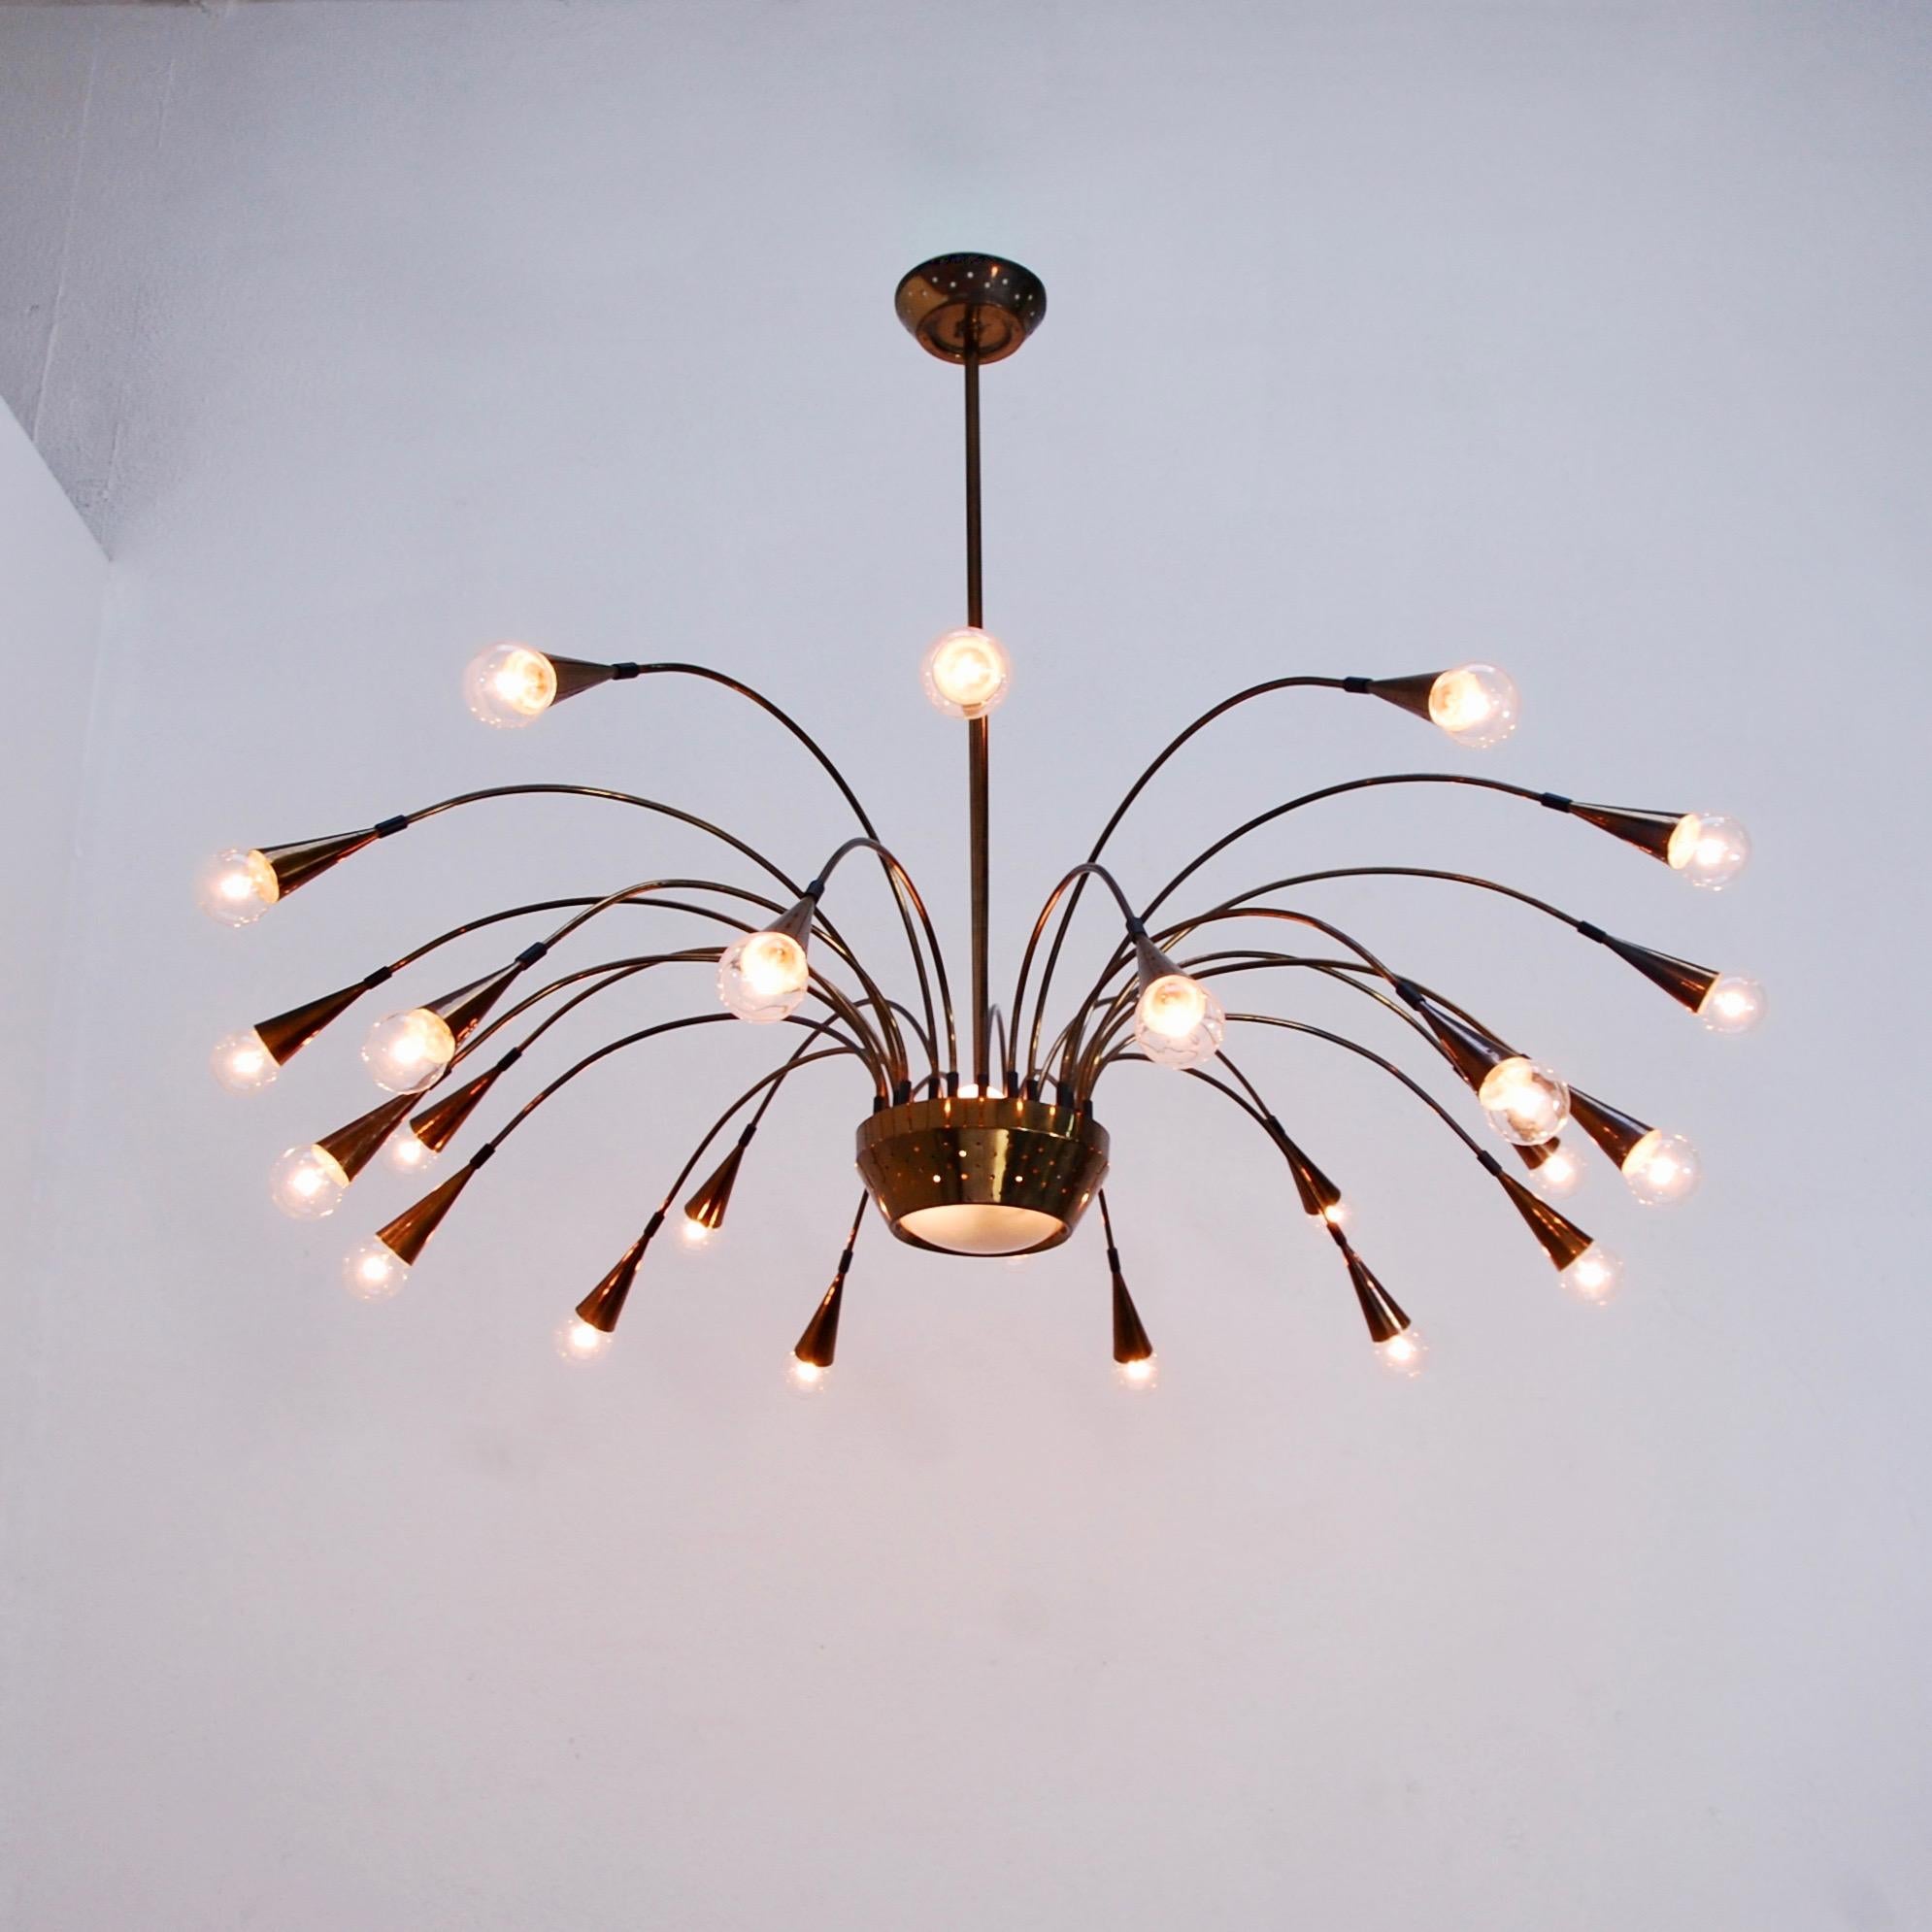 Large and expansive 25-light Italian 1950s midcentury Chandelier. Centre hub has 3 sockets emitting light in addition to the botanical arm lights. Original brass finish. E12 light bulbs. Light bulbs included.
Measurements:
Drop 32”
Fixture height